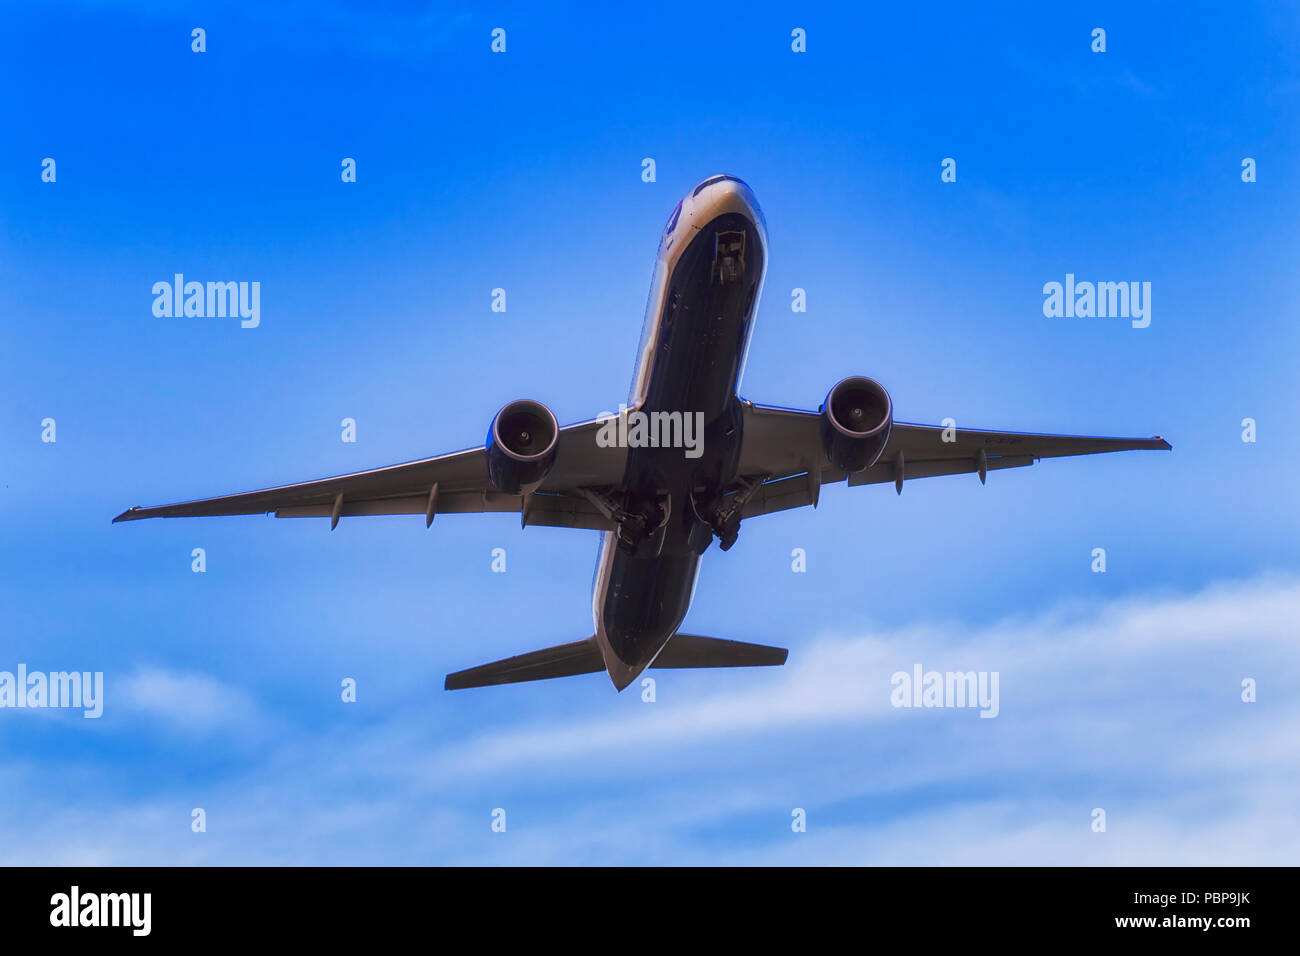 Underbelly of taking off modern jet airplain in blue sky over Sydney International airport with chassis still off and two engines under wings. Stock Photo